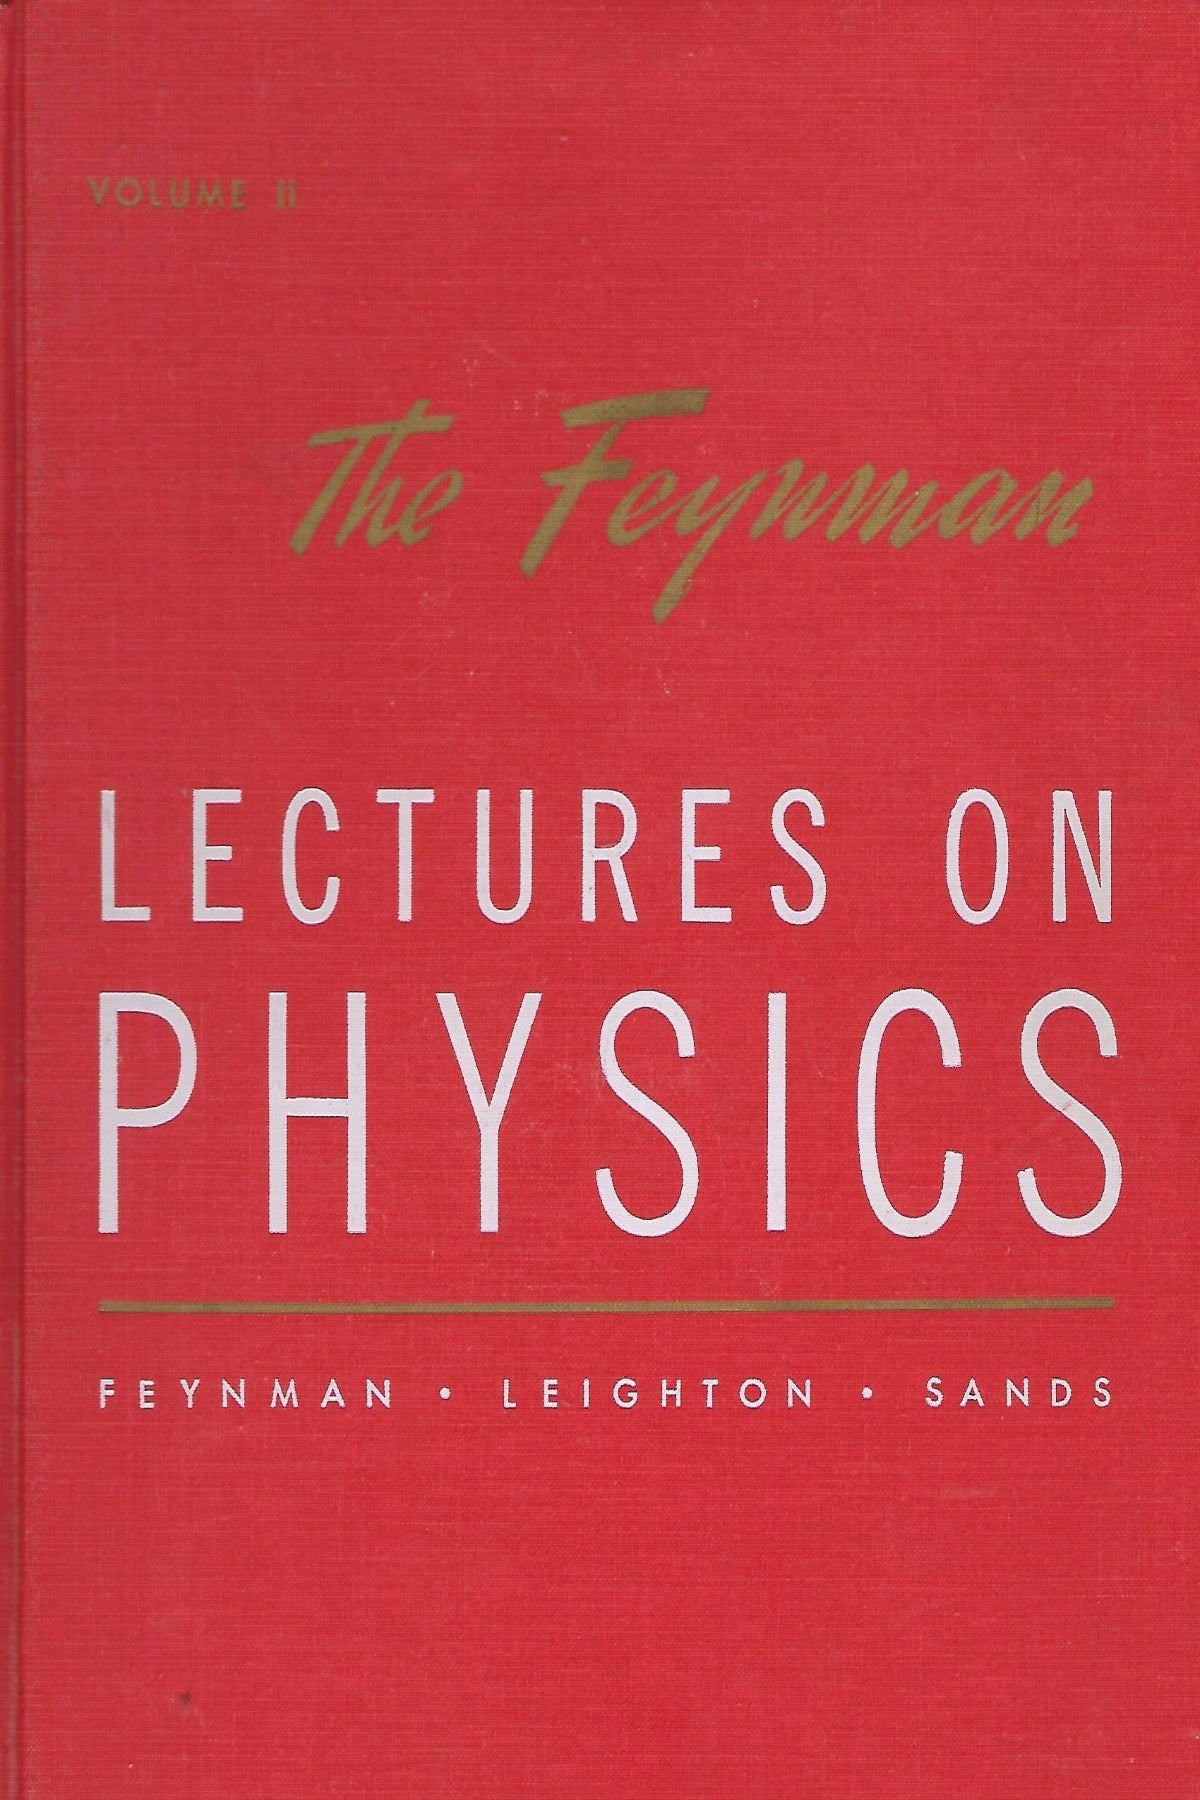 The Feynman Lectures on Physics (vol. I)